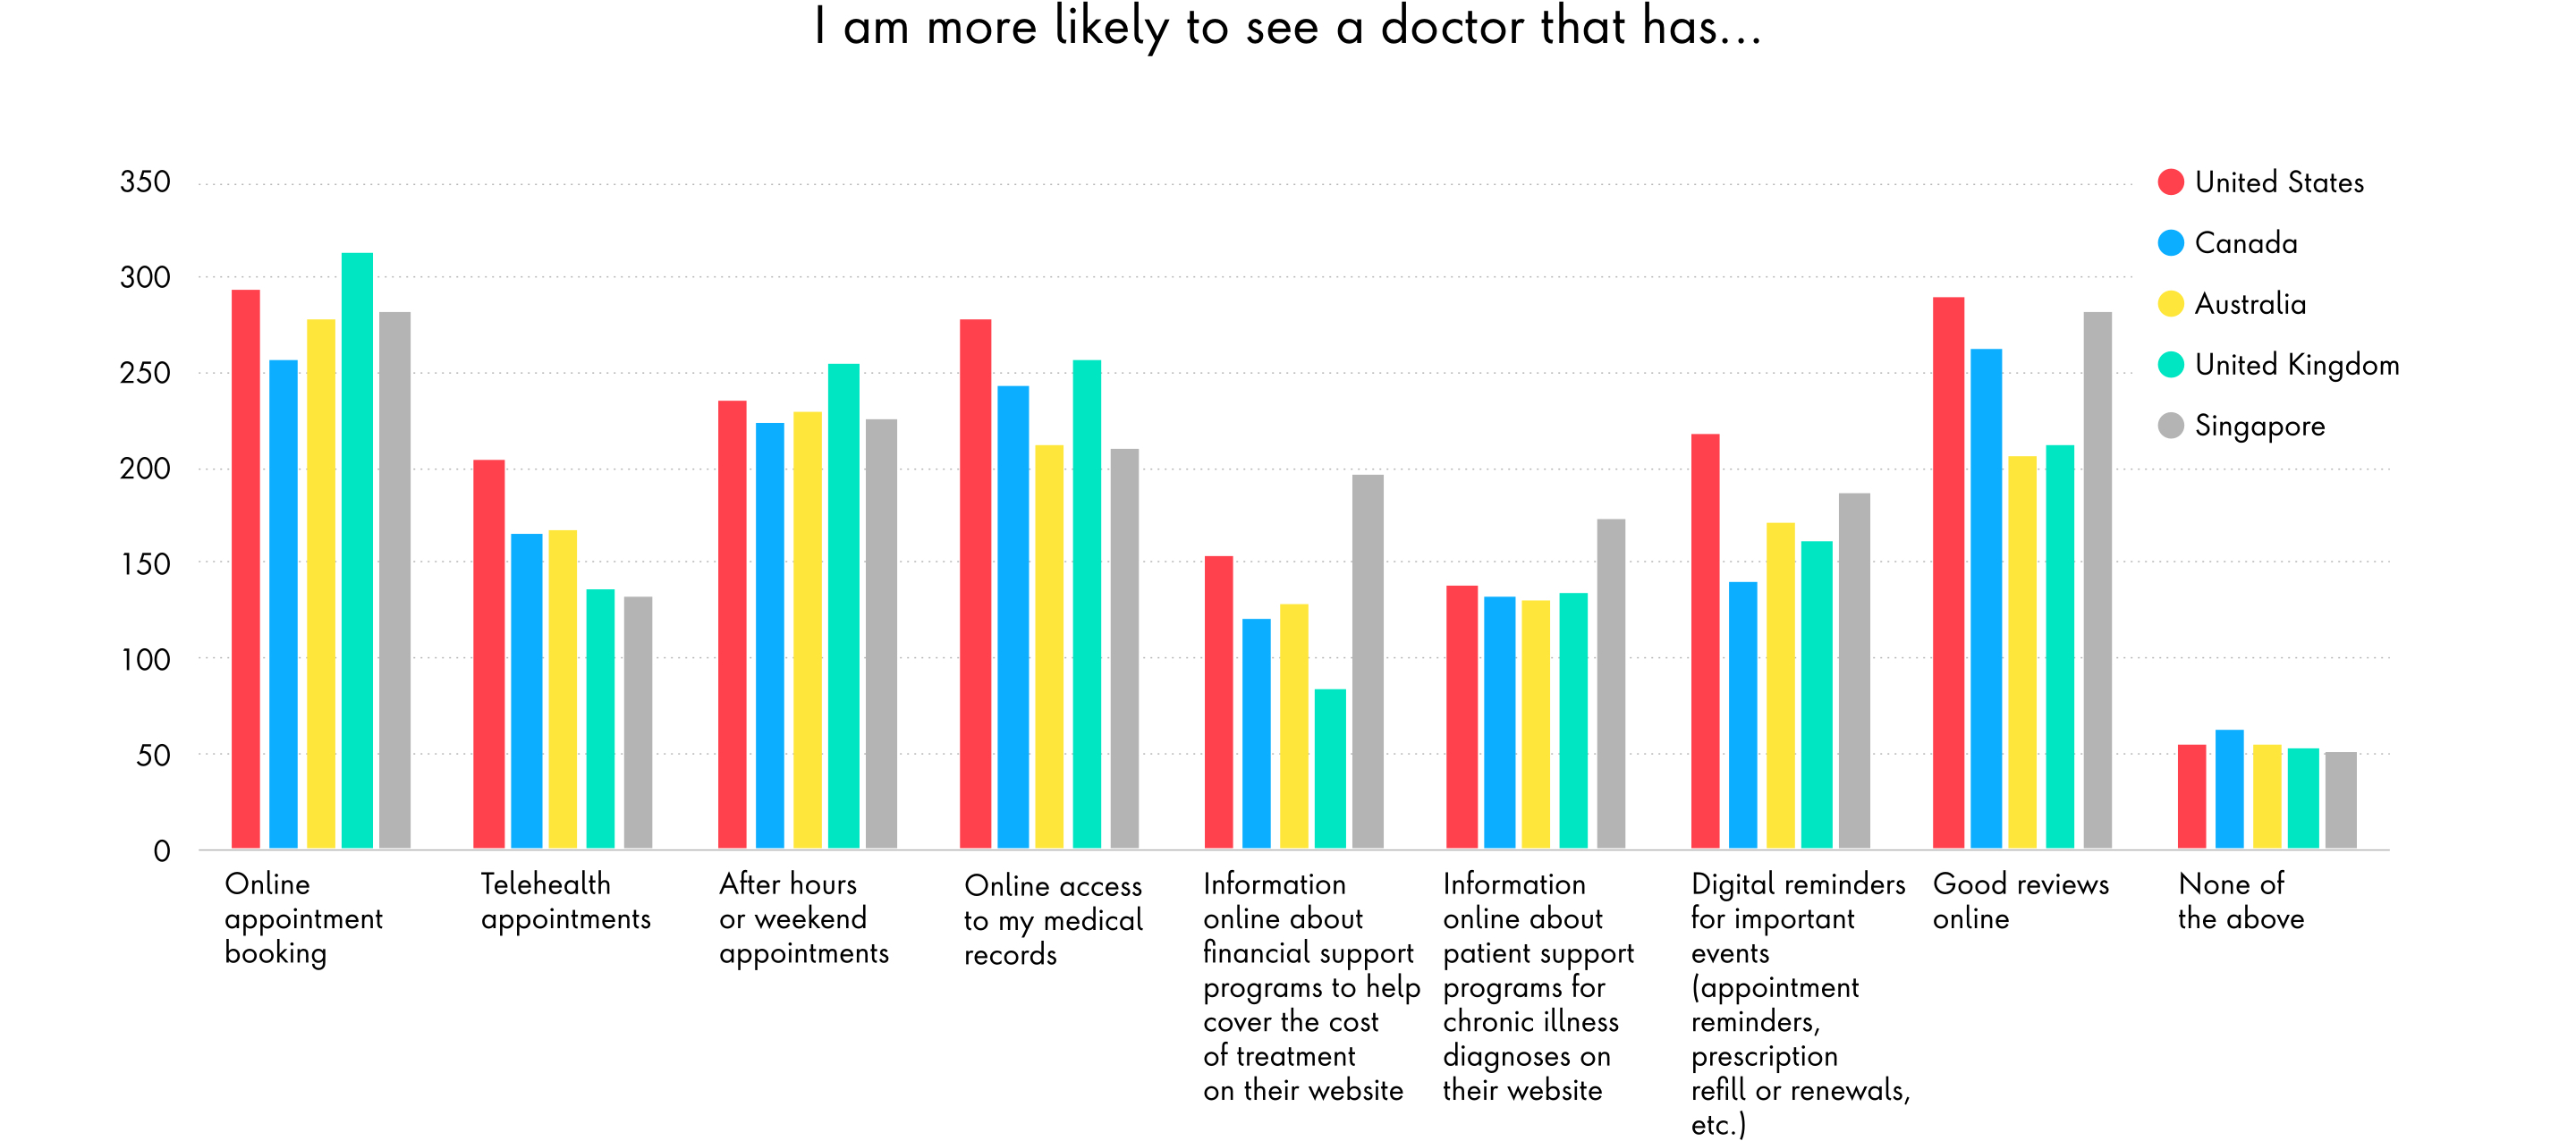 I am more likely to see a doctor that has...